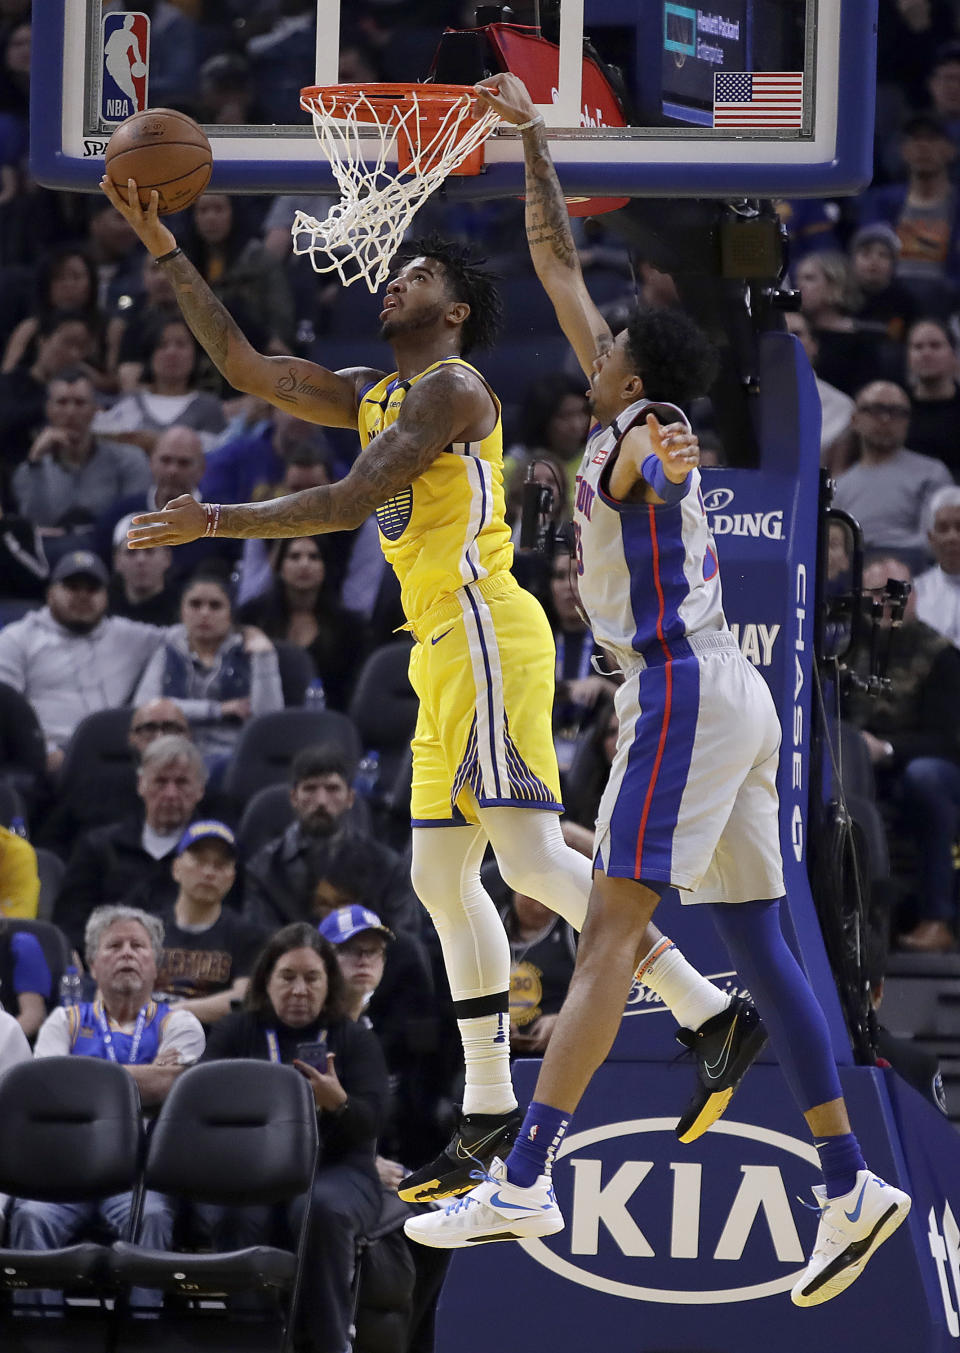 Golden State Warriors' Marquese Chriss, left, lays up a shot against Detroit Pistons' Christian Wood during the first half of an NBA basketball game Saturday, Jan. 4, 2020, in San Francisco. (AP Photo/Ben Margot)